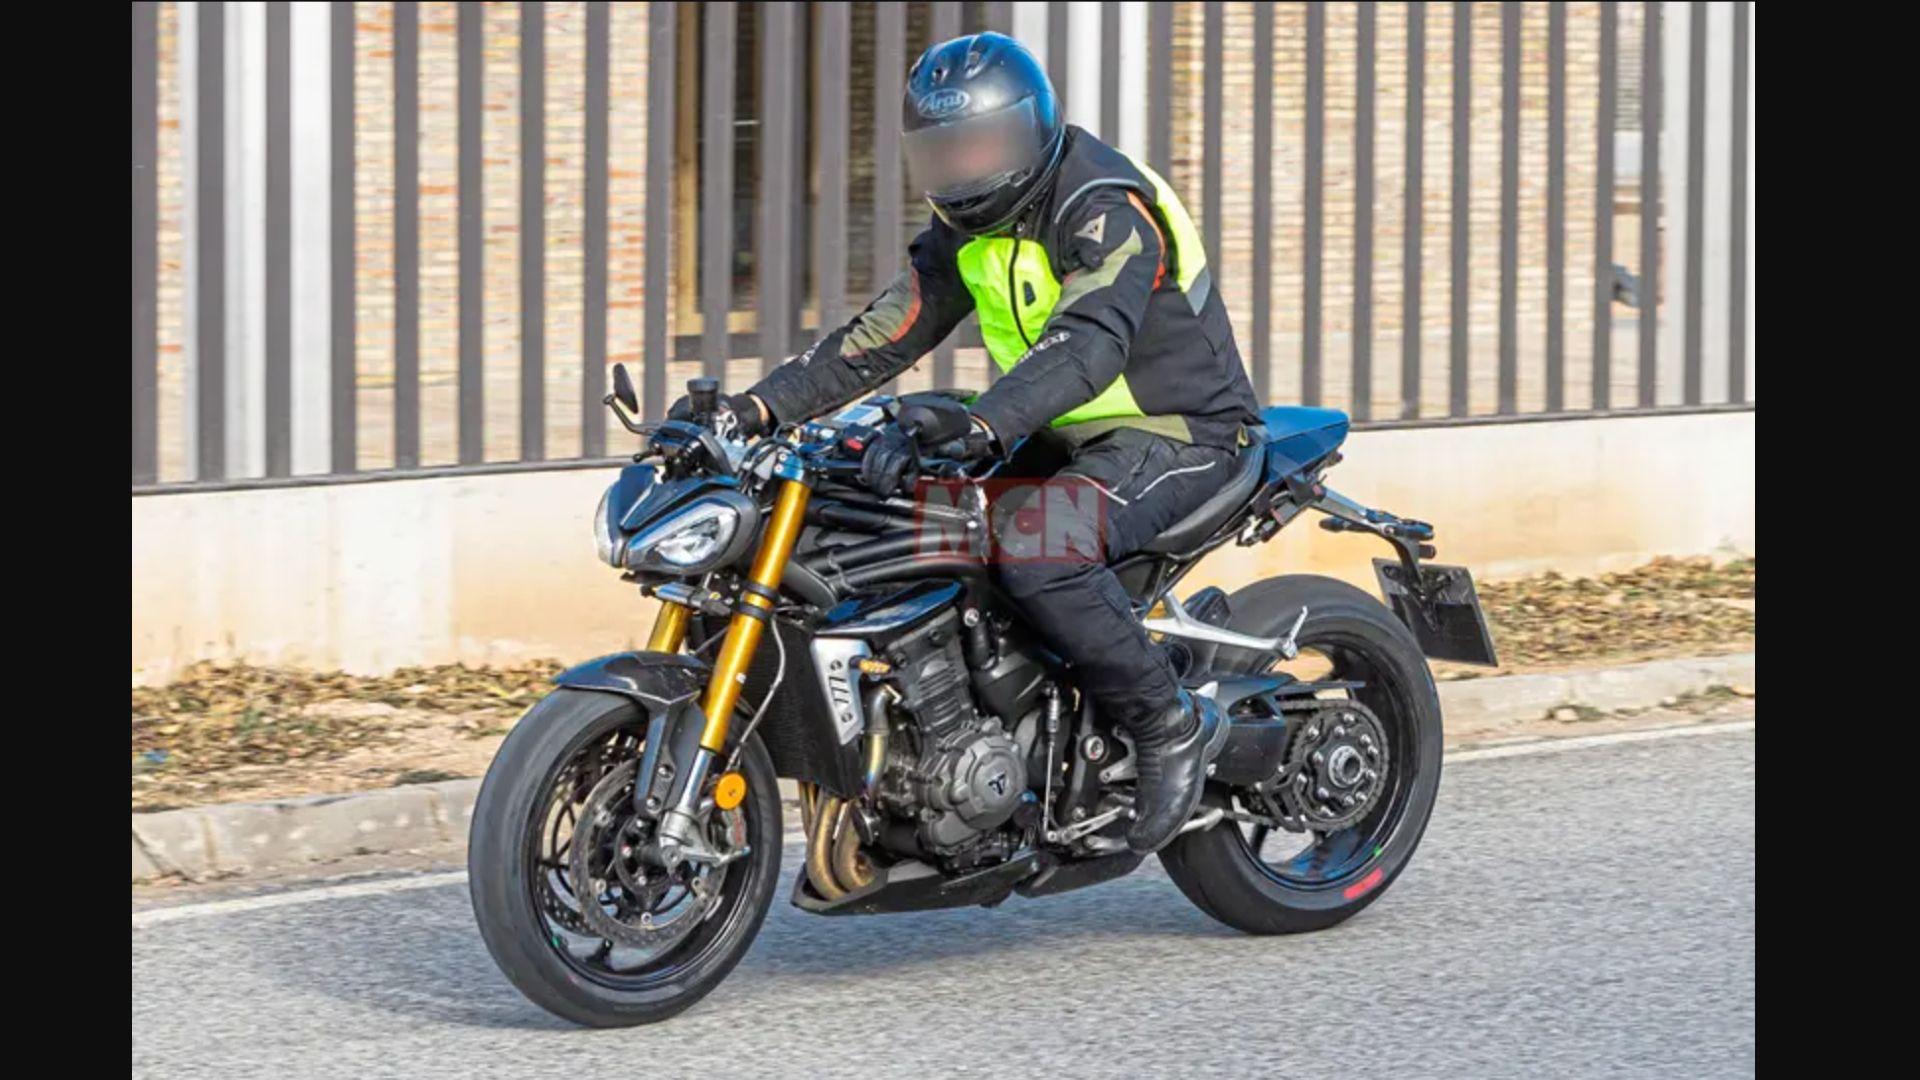 The updated bike looks to be sportier, with a more committed riding position, as well as semi-active electronic suspension.